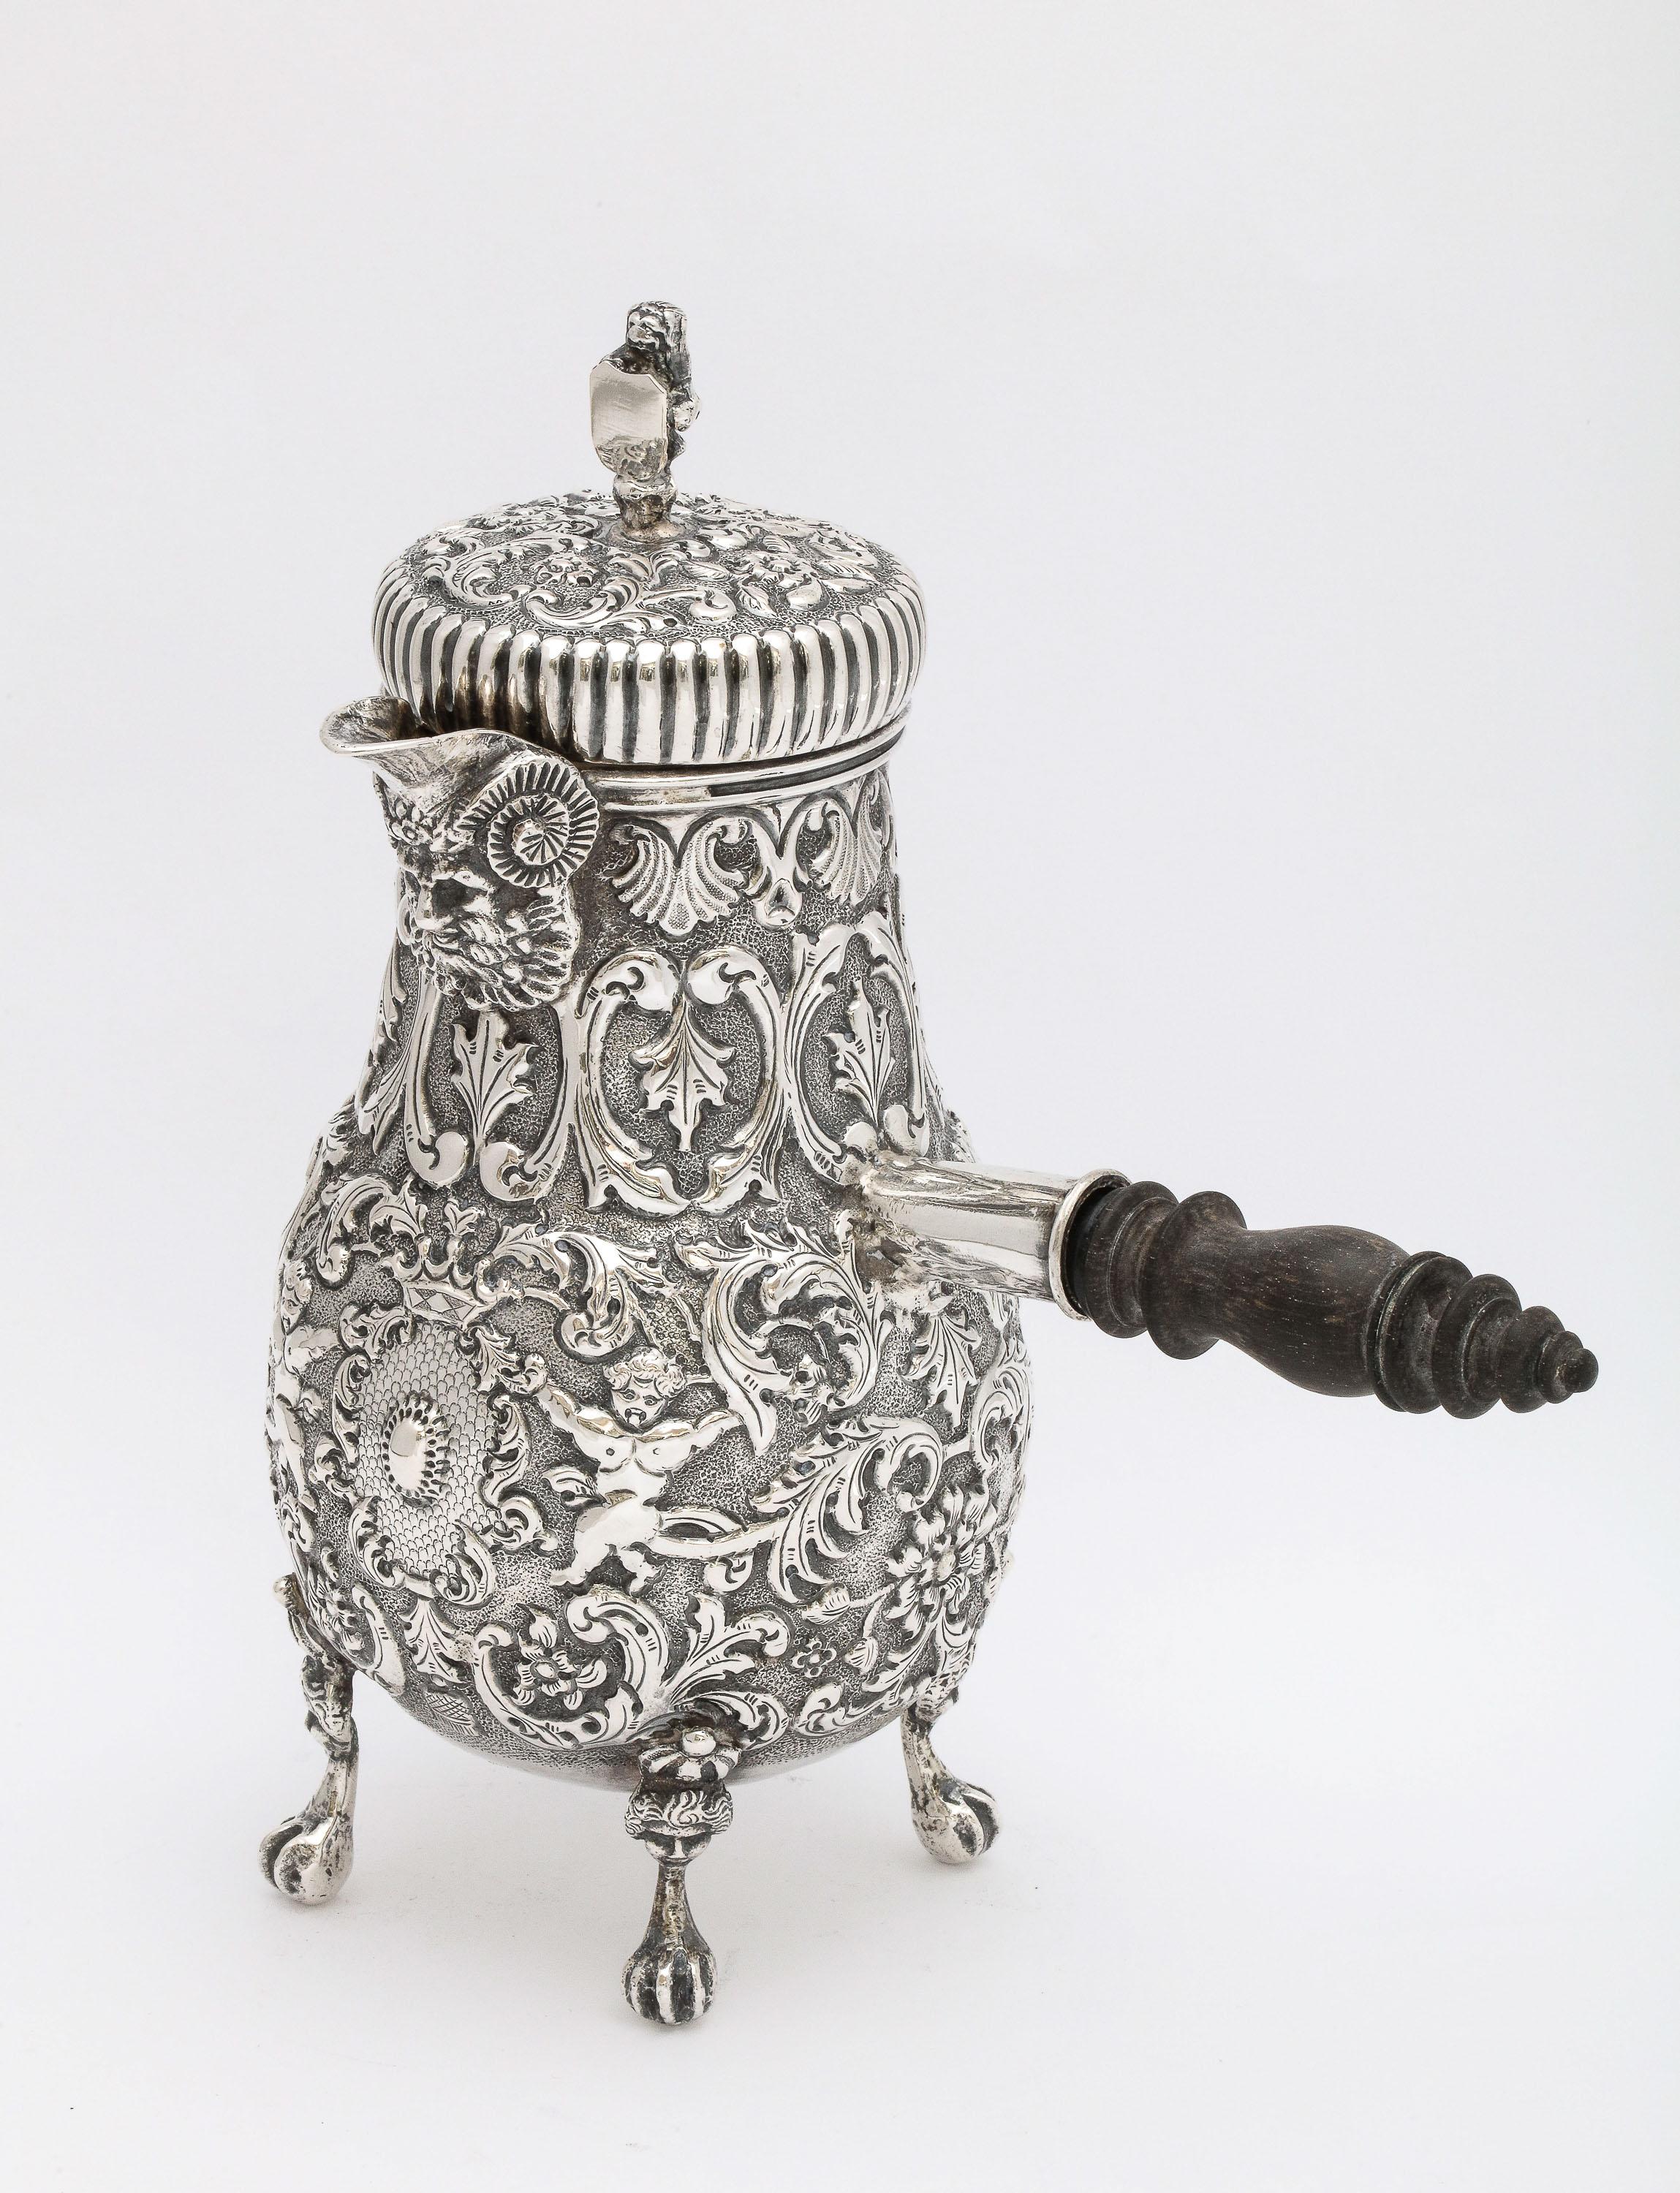 Neoclassical-Style, Continental Silver (.800), paw-footed chocolate pot with wood handle and hinged lid,  Dutch, year-hallmarked for 1886, Ate deGroot Boersma Sneek - maker. Beautiful, detailed repousse design (with cherubs, leaves, etc.) and having